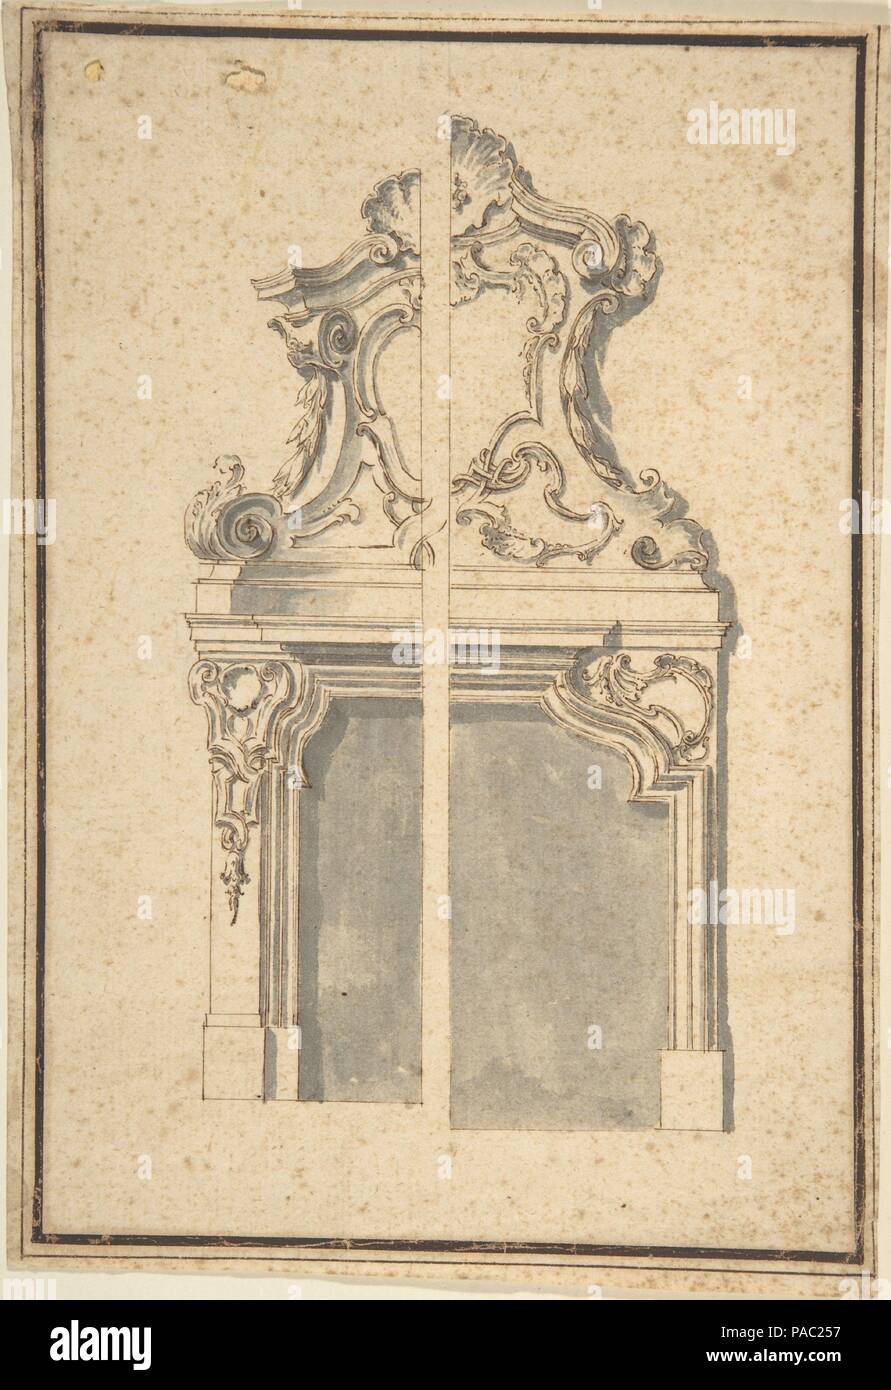 Drawing for Mantelpieces. Artist: Anonymous, Italian, 18th century. Dimensions: 9-1/4 x 6-5/16 in (23.4 x 16.1 cm). Date: 18th century. Museum: Metropolitan Museum of Art, New York, USA. Stock Photo